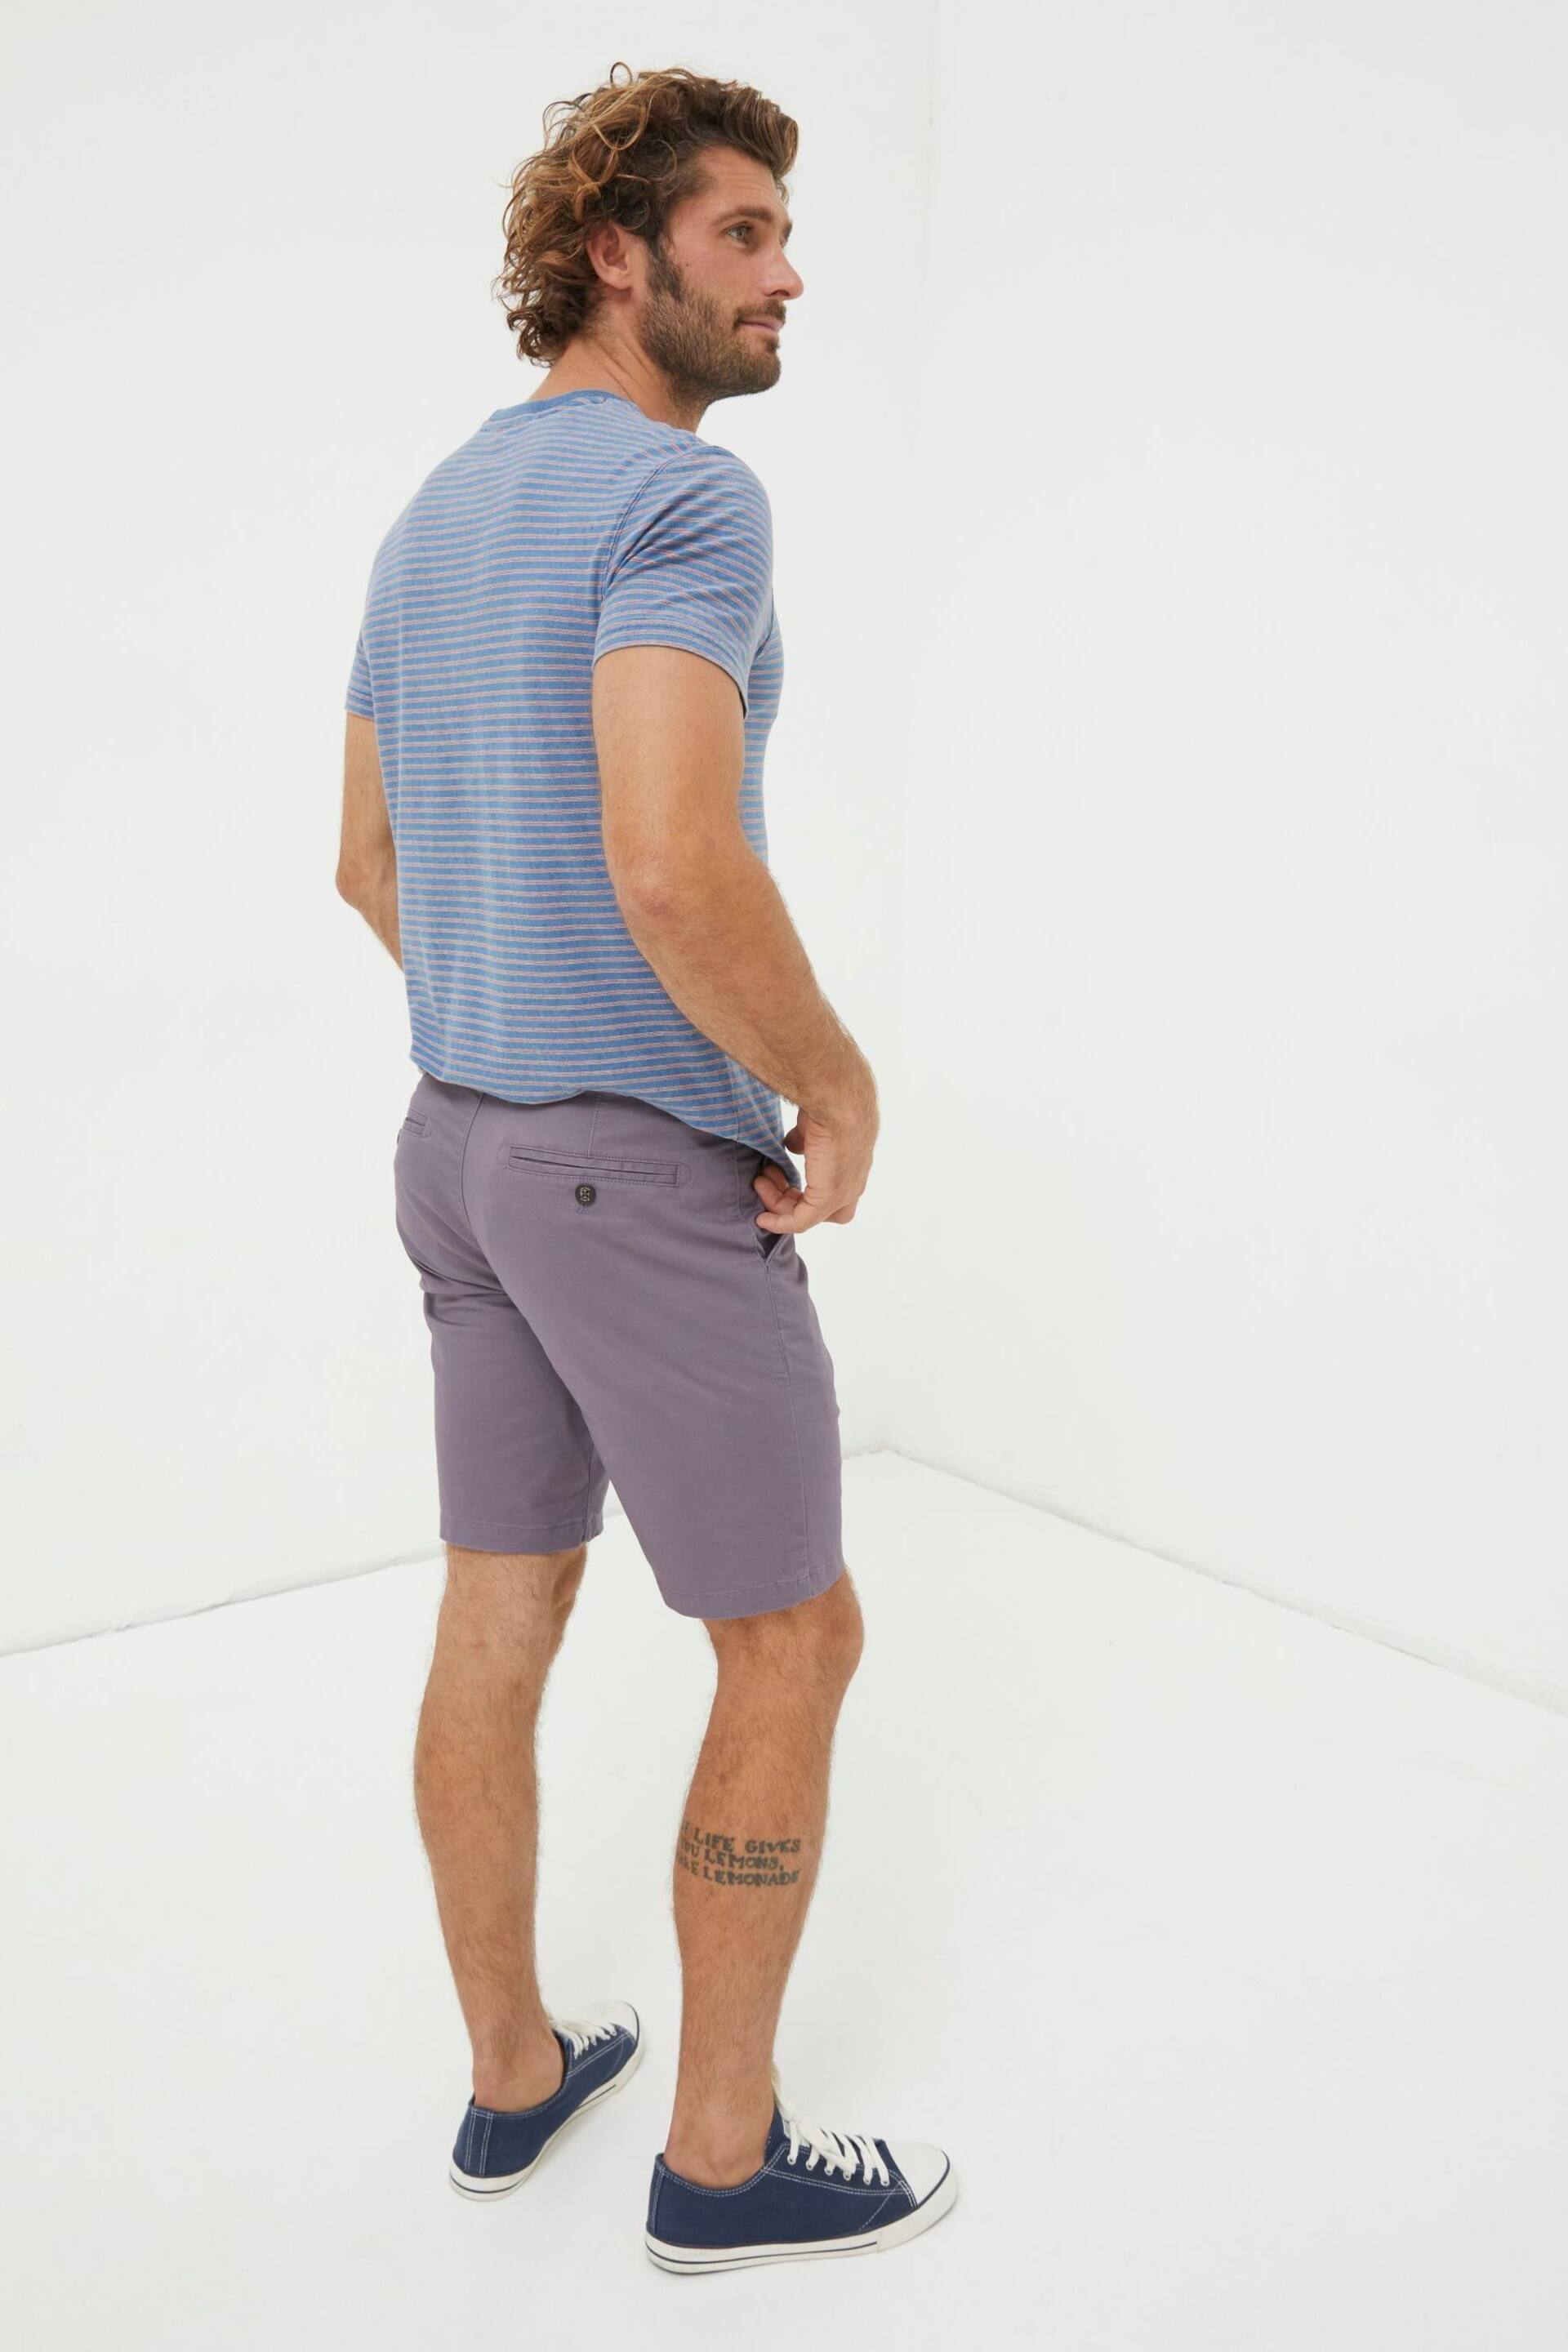 FatFace Purple Mawes Chinos Shorts - Image 2 of 5